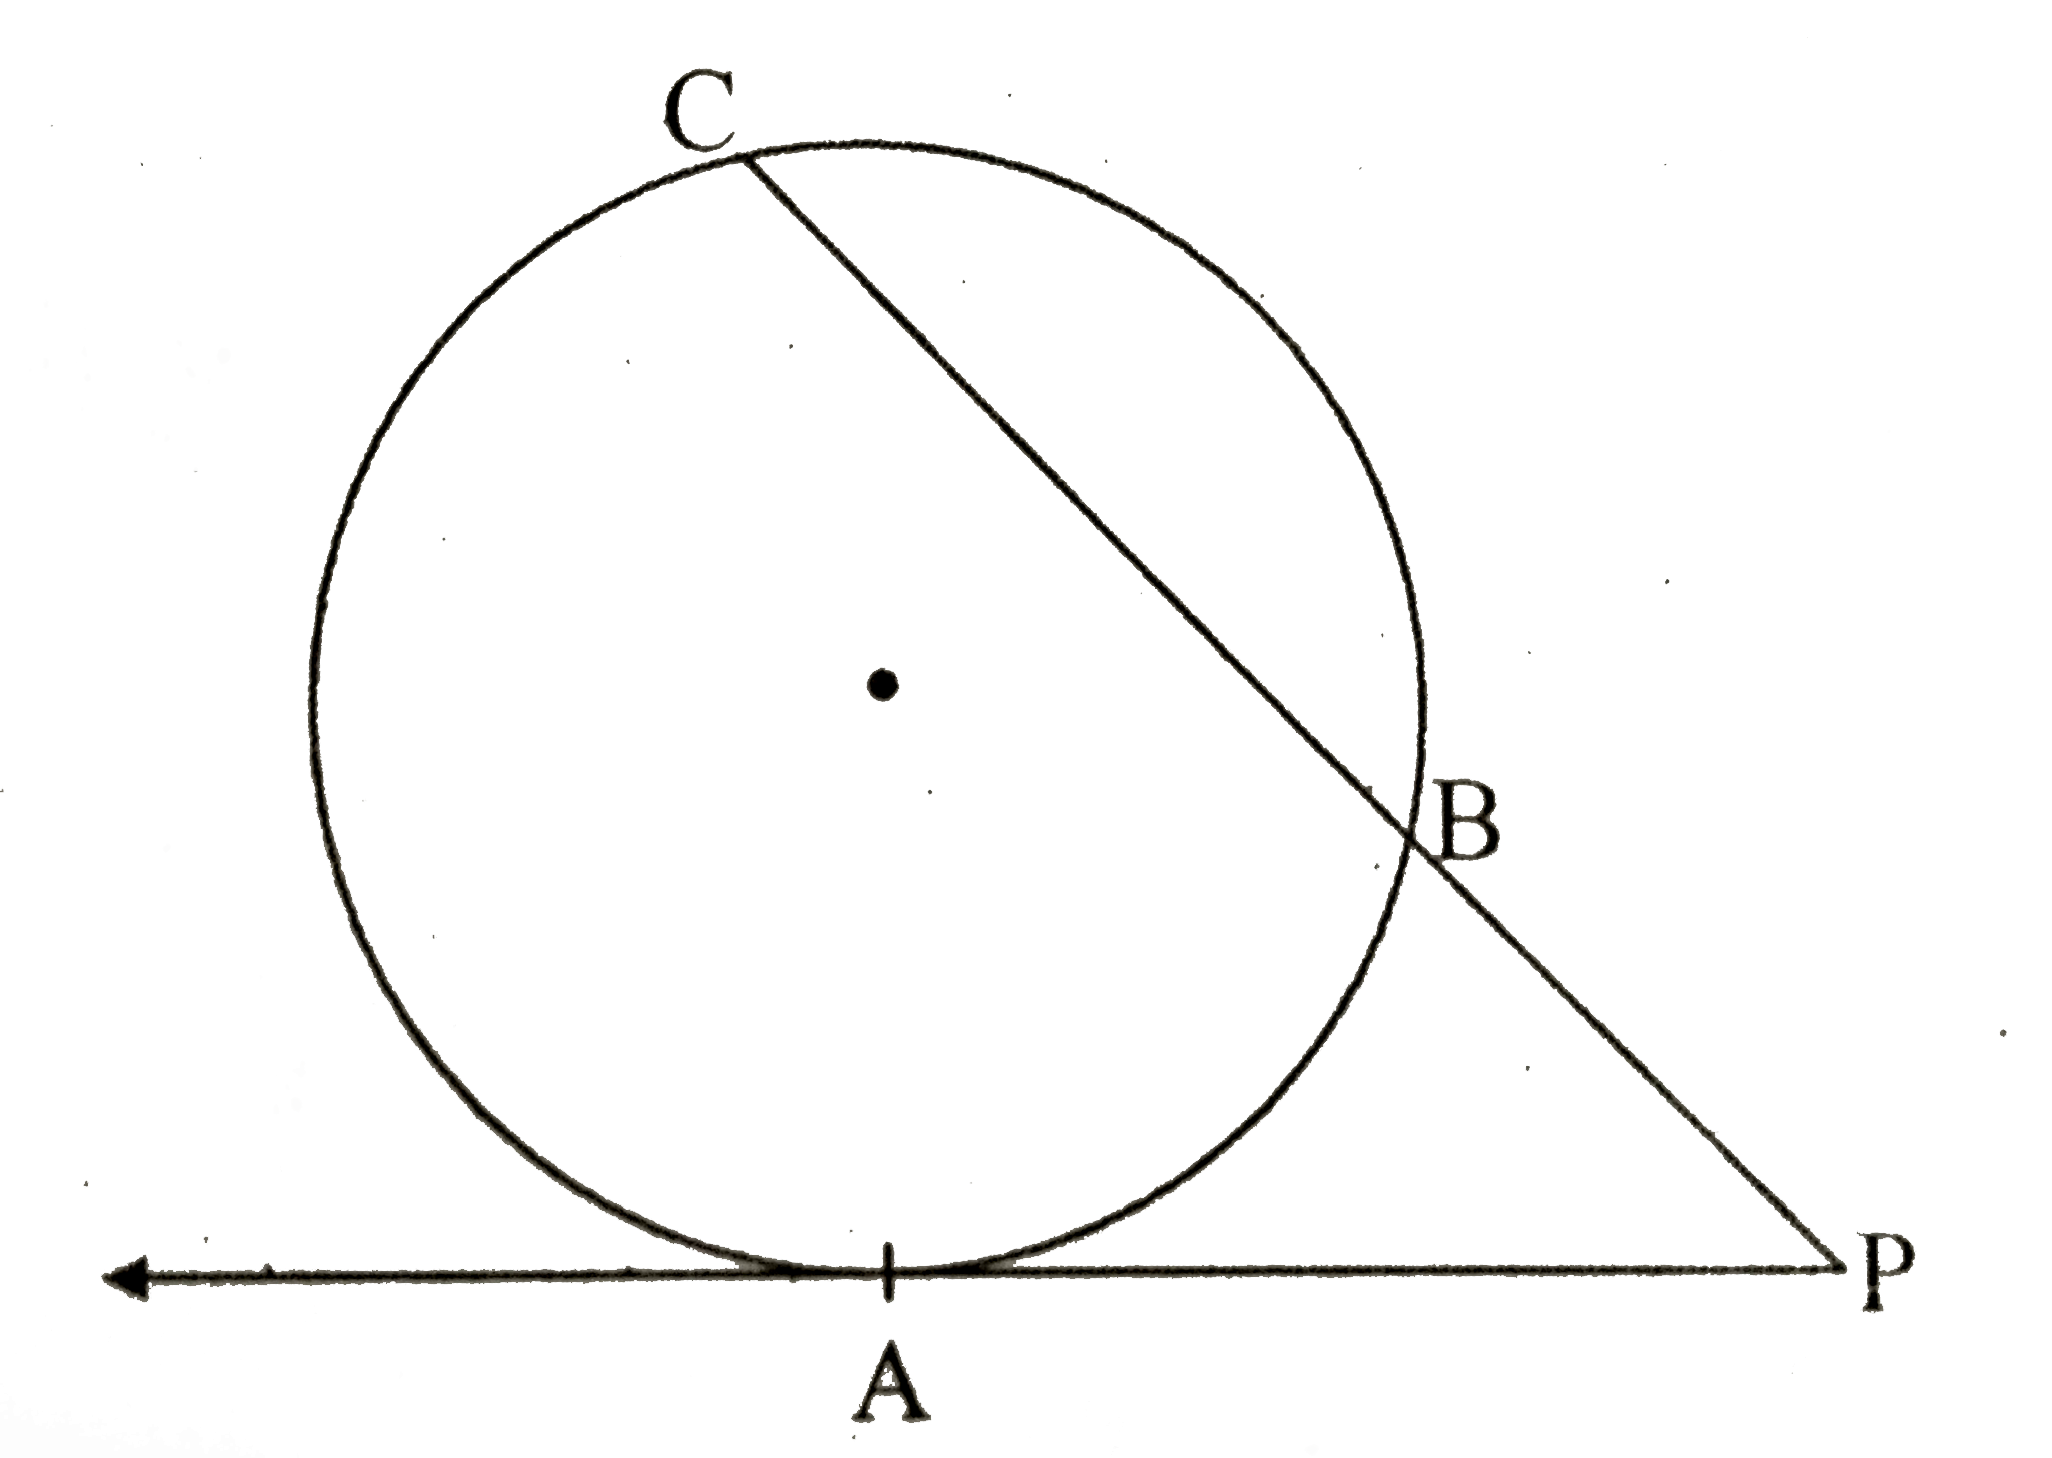 In the given figure, a tangent segment PA touching a circle in A and a secant PBC are shown. If AP = 15 cm and BP = 10 cm, find the length of PC.